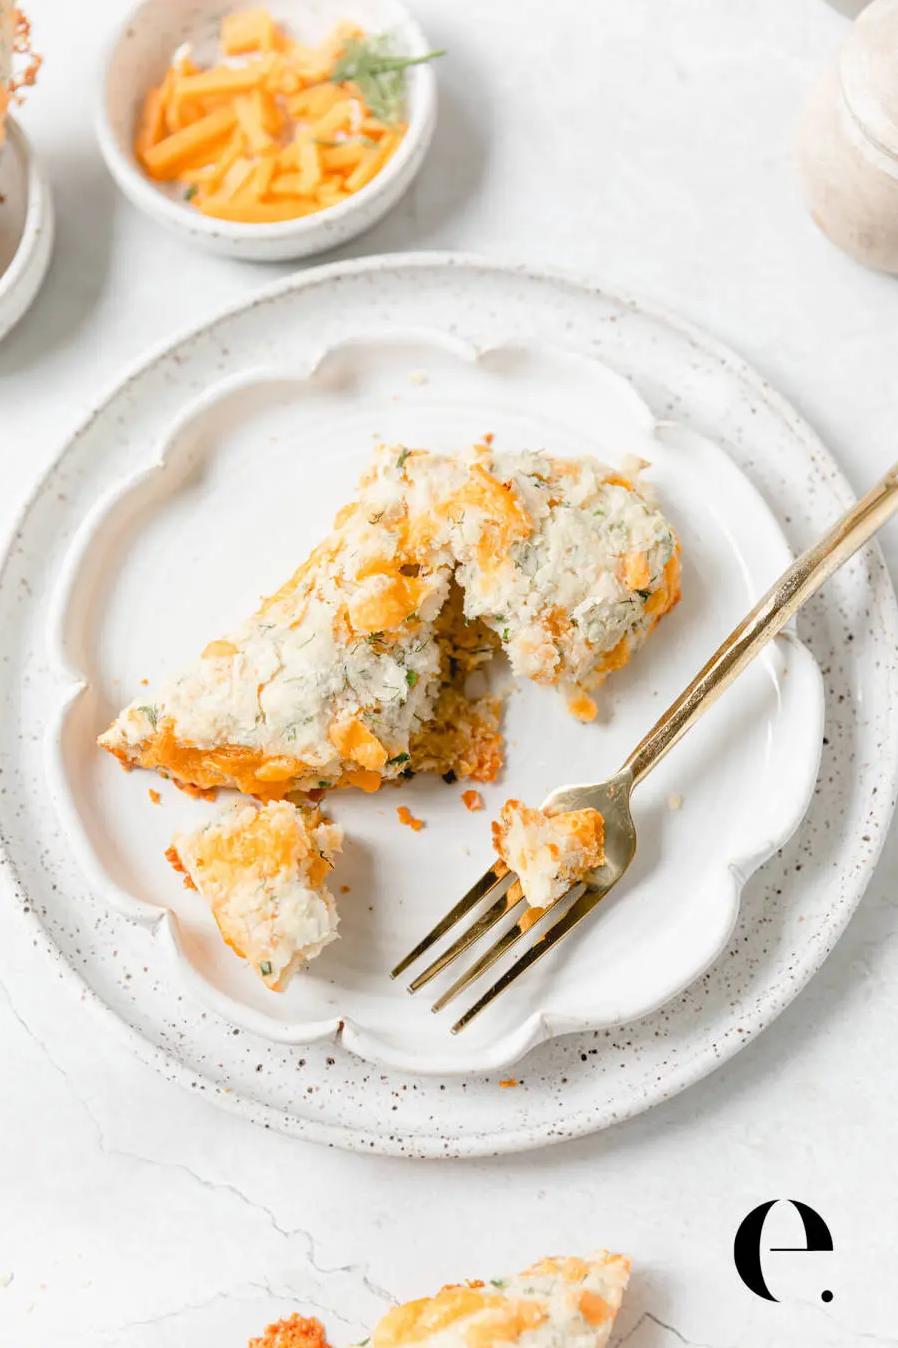  Serve these scones warm and watch the cheese melt in your mouth!